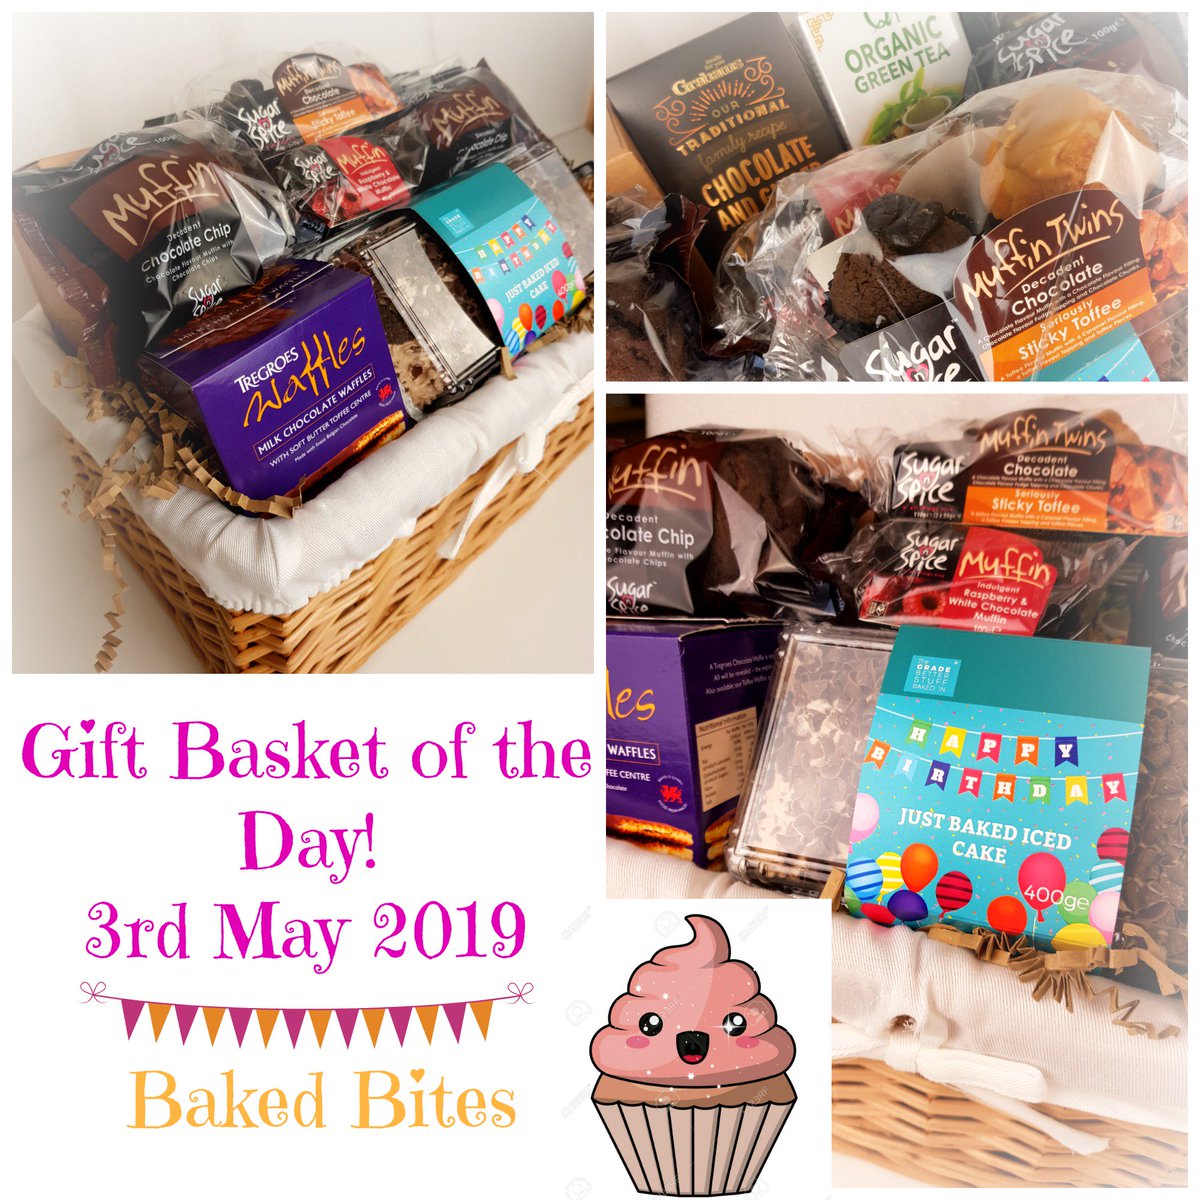 Baskets Galore On Twitter Todays Gift Basket Of The Day